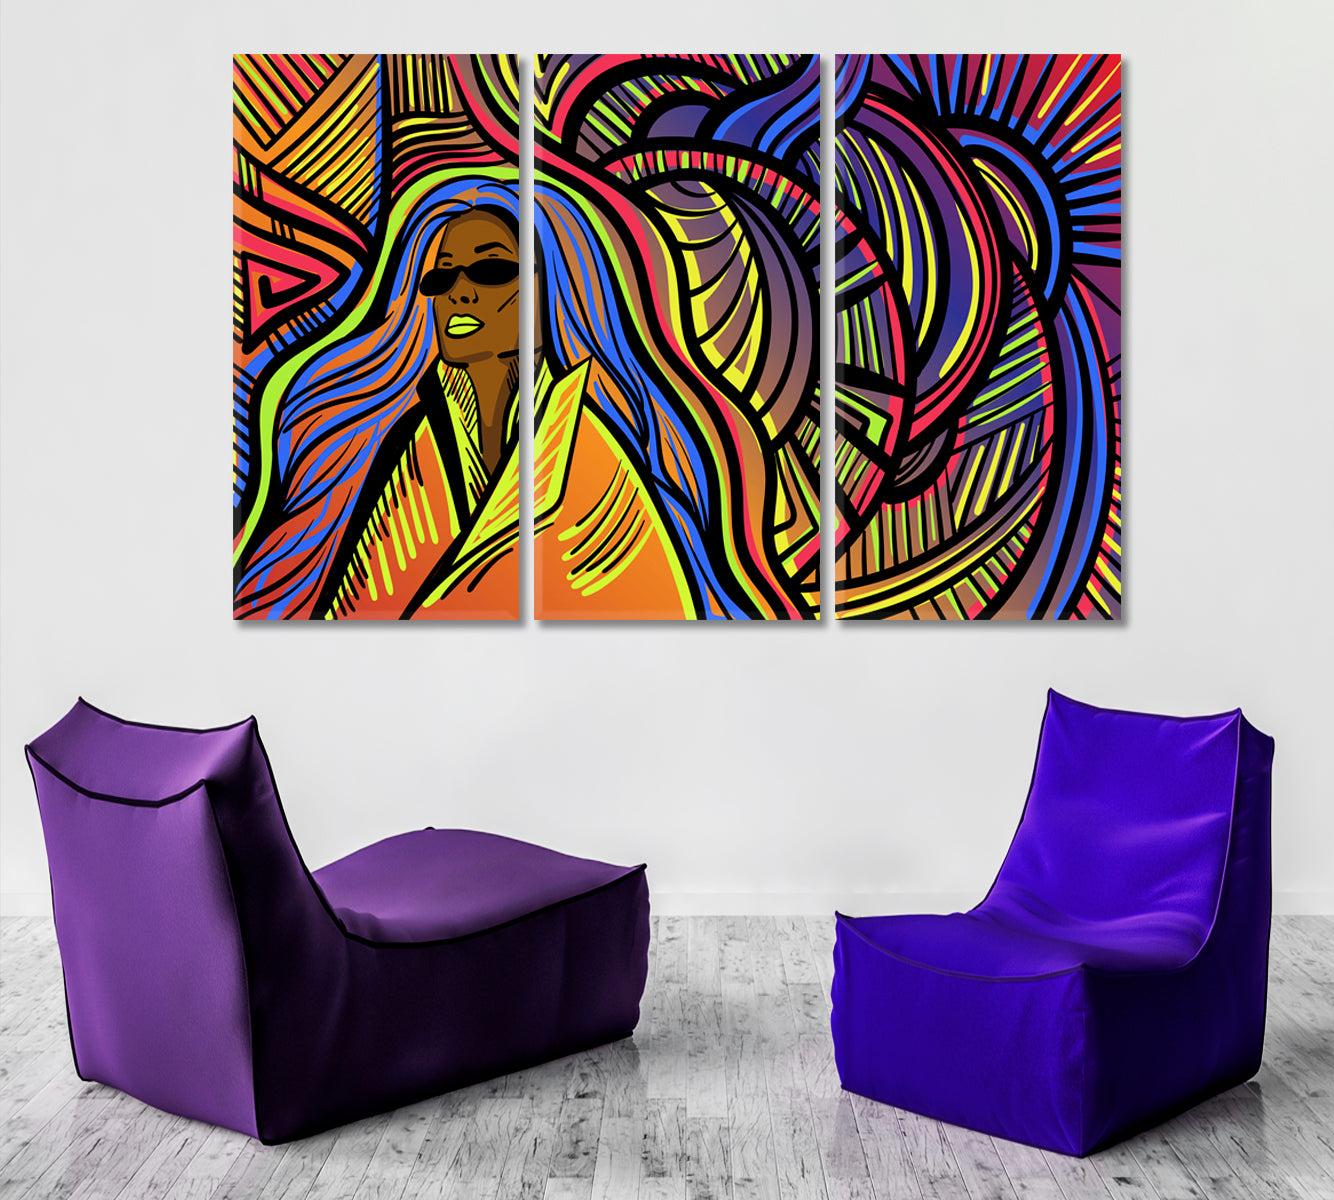 DOODLES Colorful Psychedelic Lines With Abstract Woman Surreal Fantasy Large Art Print Décor Artesty 3 panels 36" x 24" 